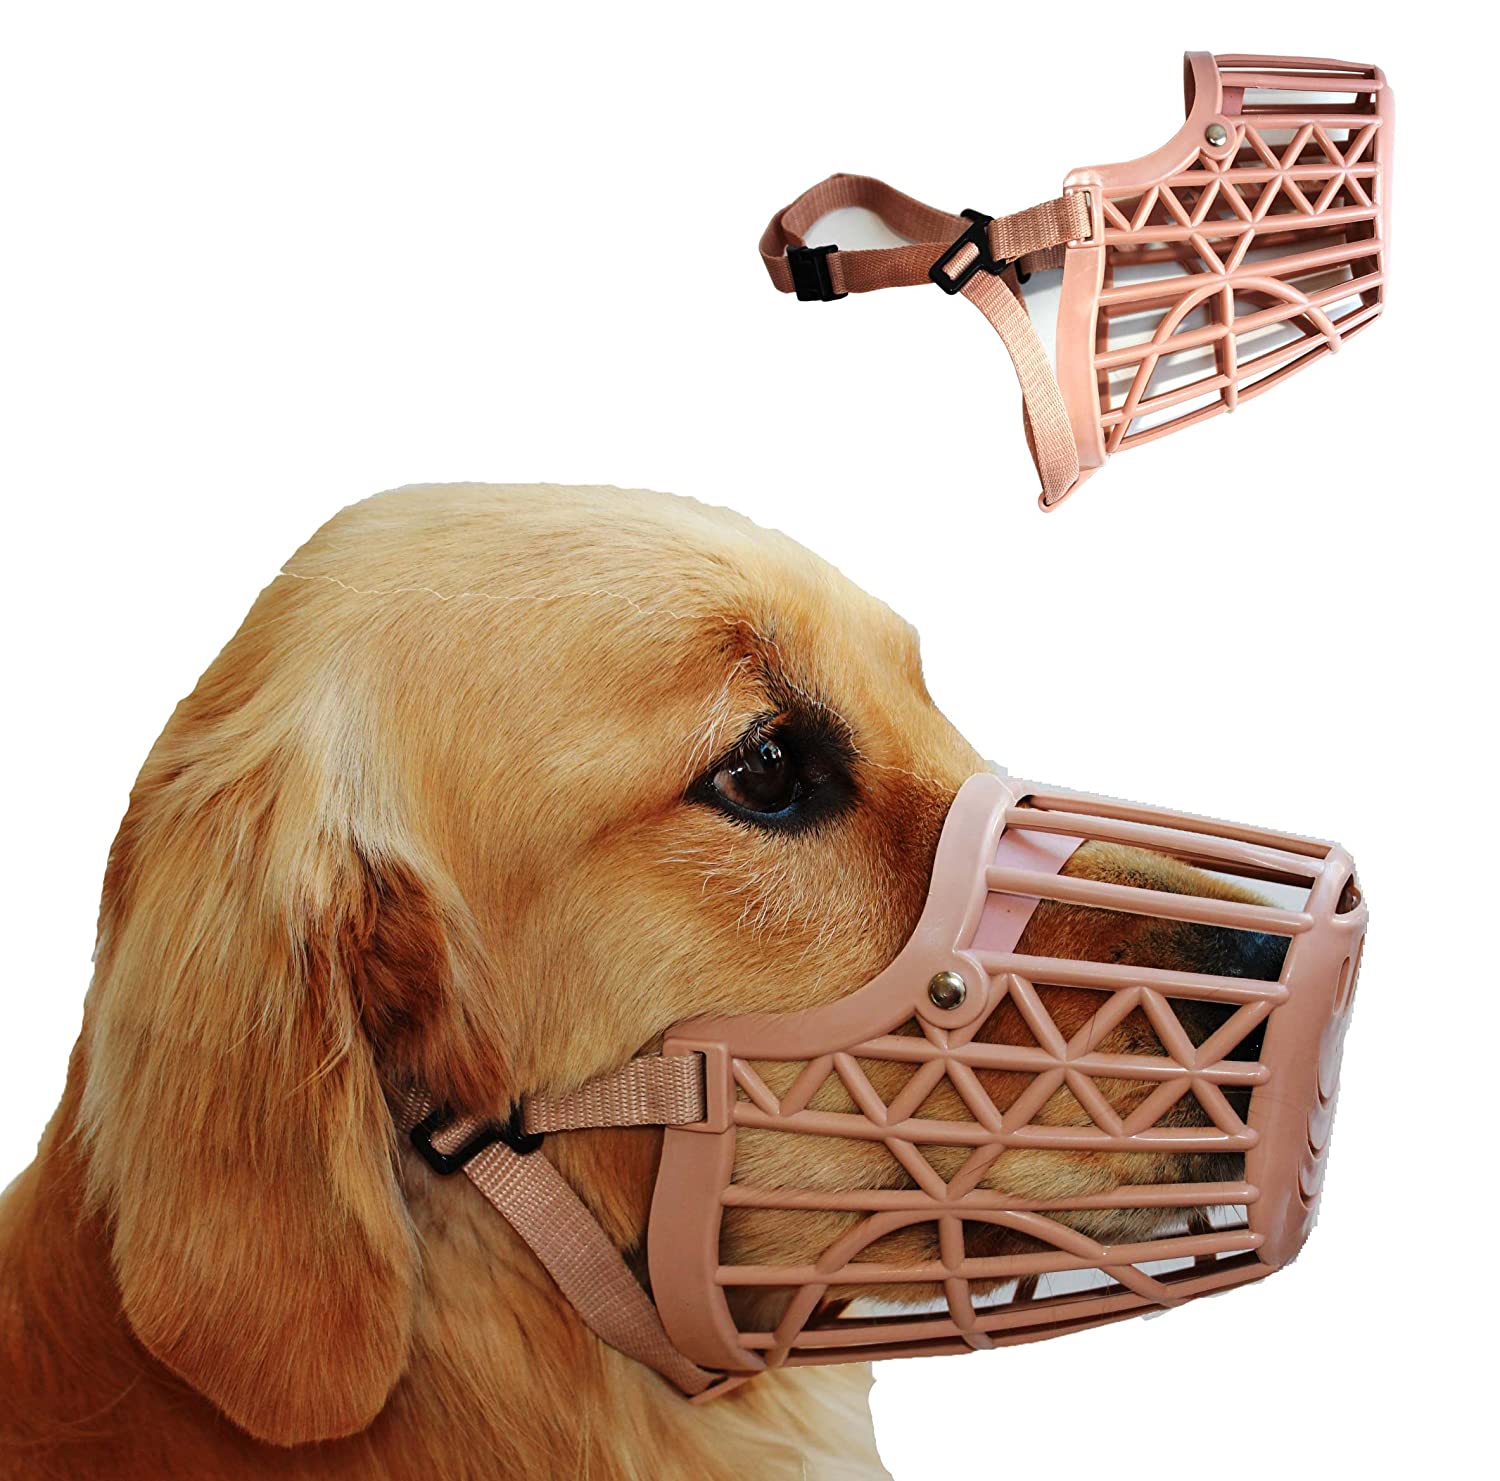 1X adjustable basket mouth muzzle cover for dog training bark bite chew controIJ